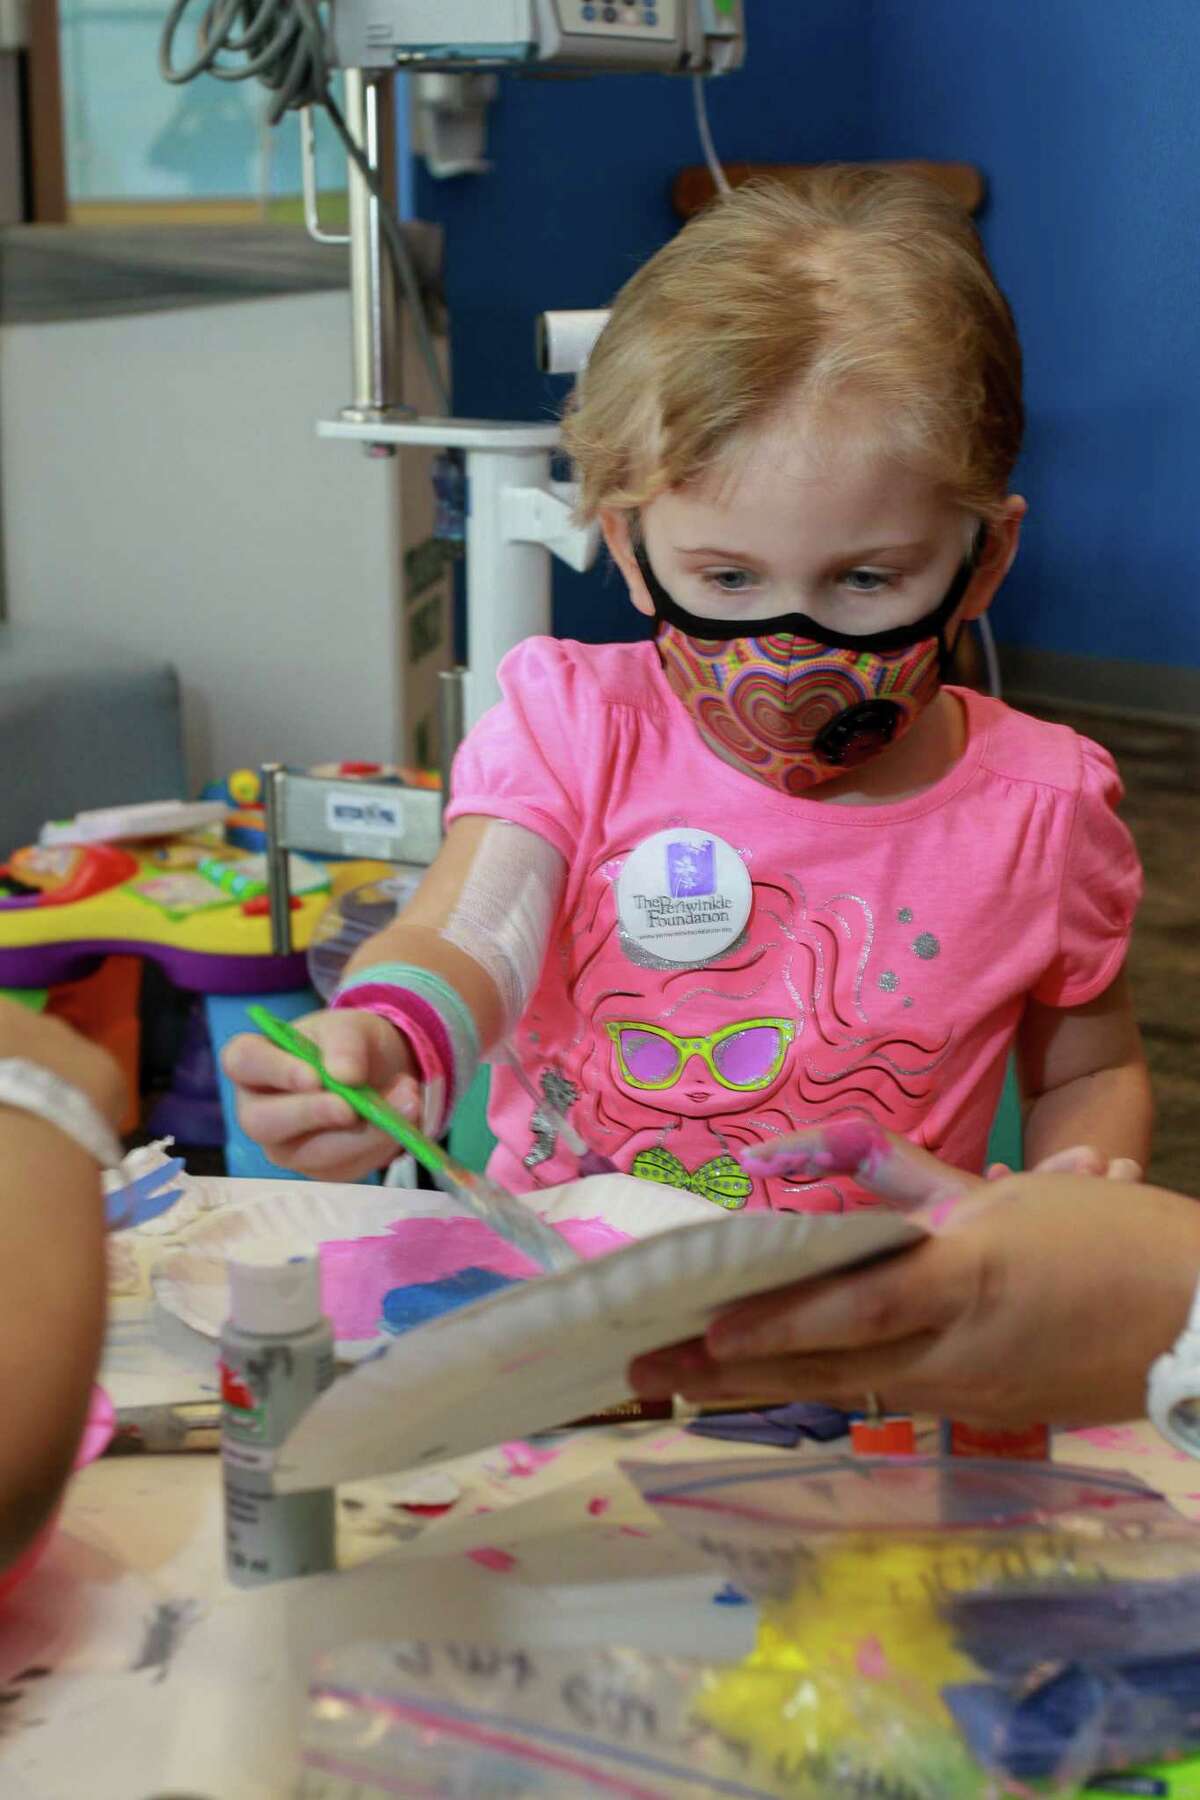 Evie Reed, 5, doing Animal Arts and Crafts at Camp Periwinkle Days. Camp Periwinkle Days transforms the Texas Children's Cancer and Hematology Centers waiting rooms into a two-day camp with games, prizes and activities to enrich the lives of some 500 children challenged by cancer under care at the hospital in Houston on June 17, 2016.